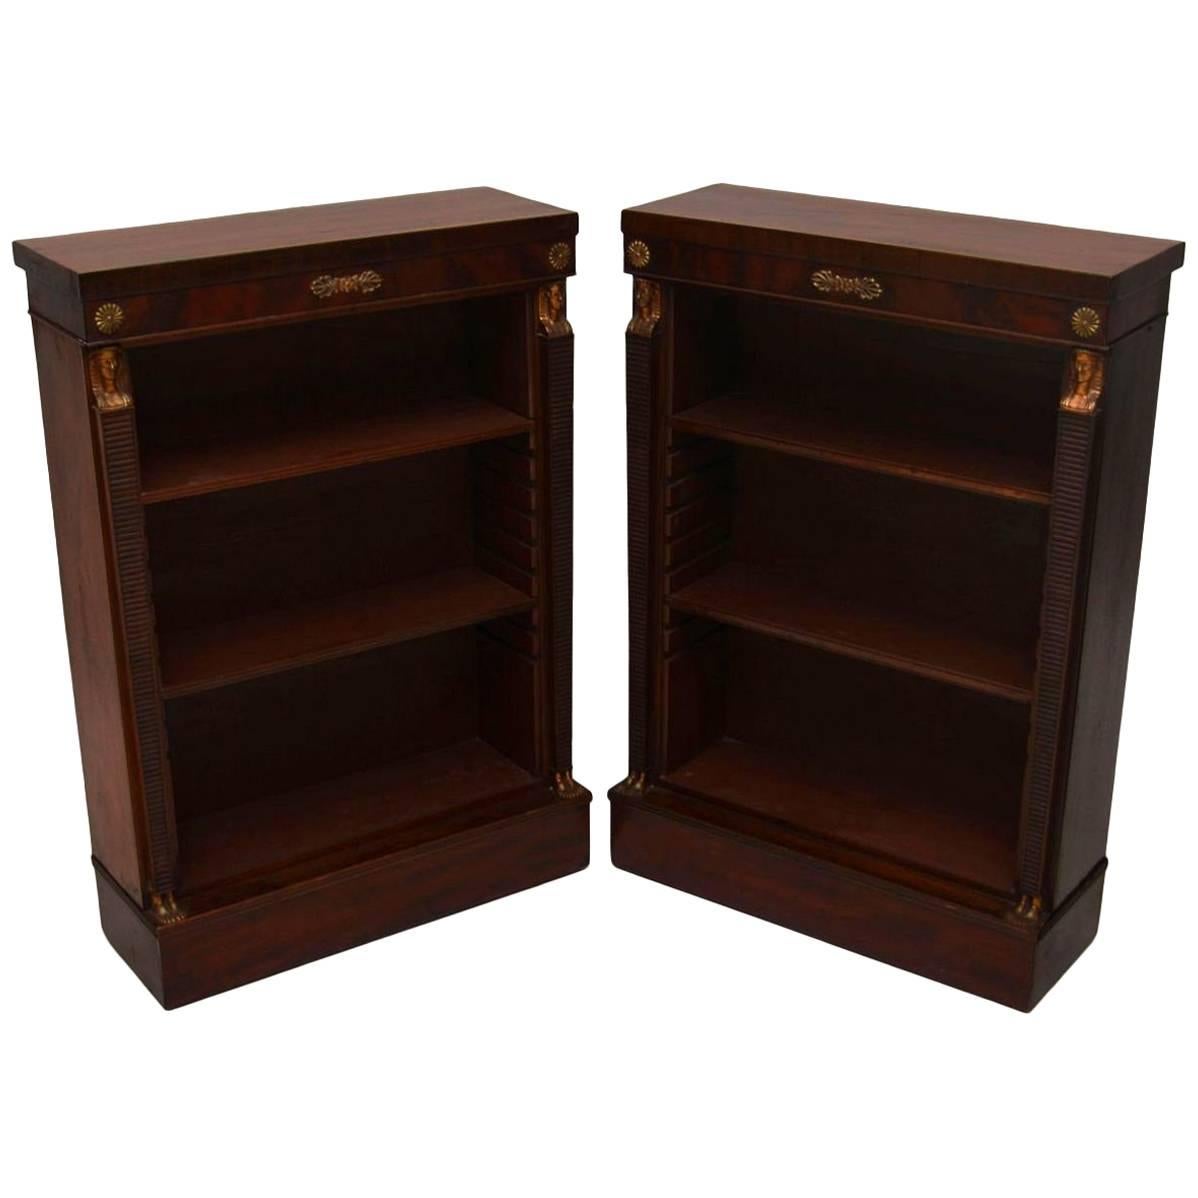 Pair of Antique Mahogany Open Bookcases